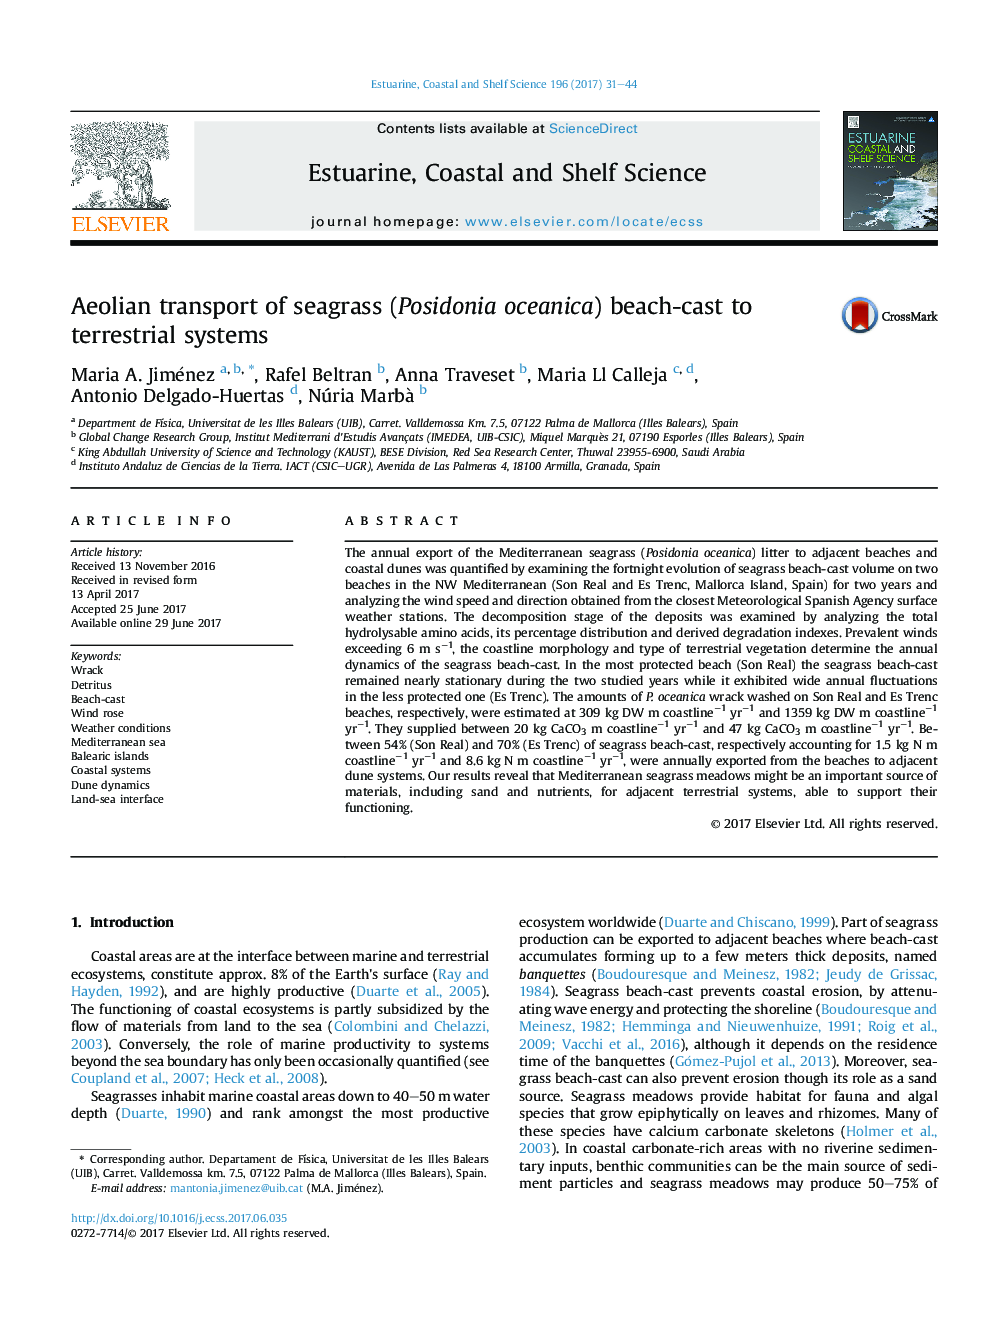 Aeolian transport of seagrass (Posidonia oceanica) beach-cast to terrestrial systems